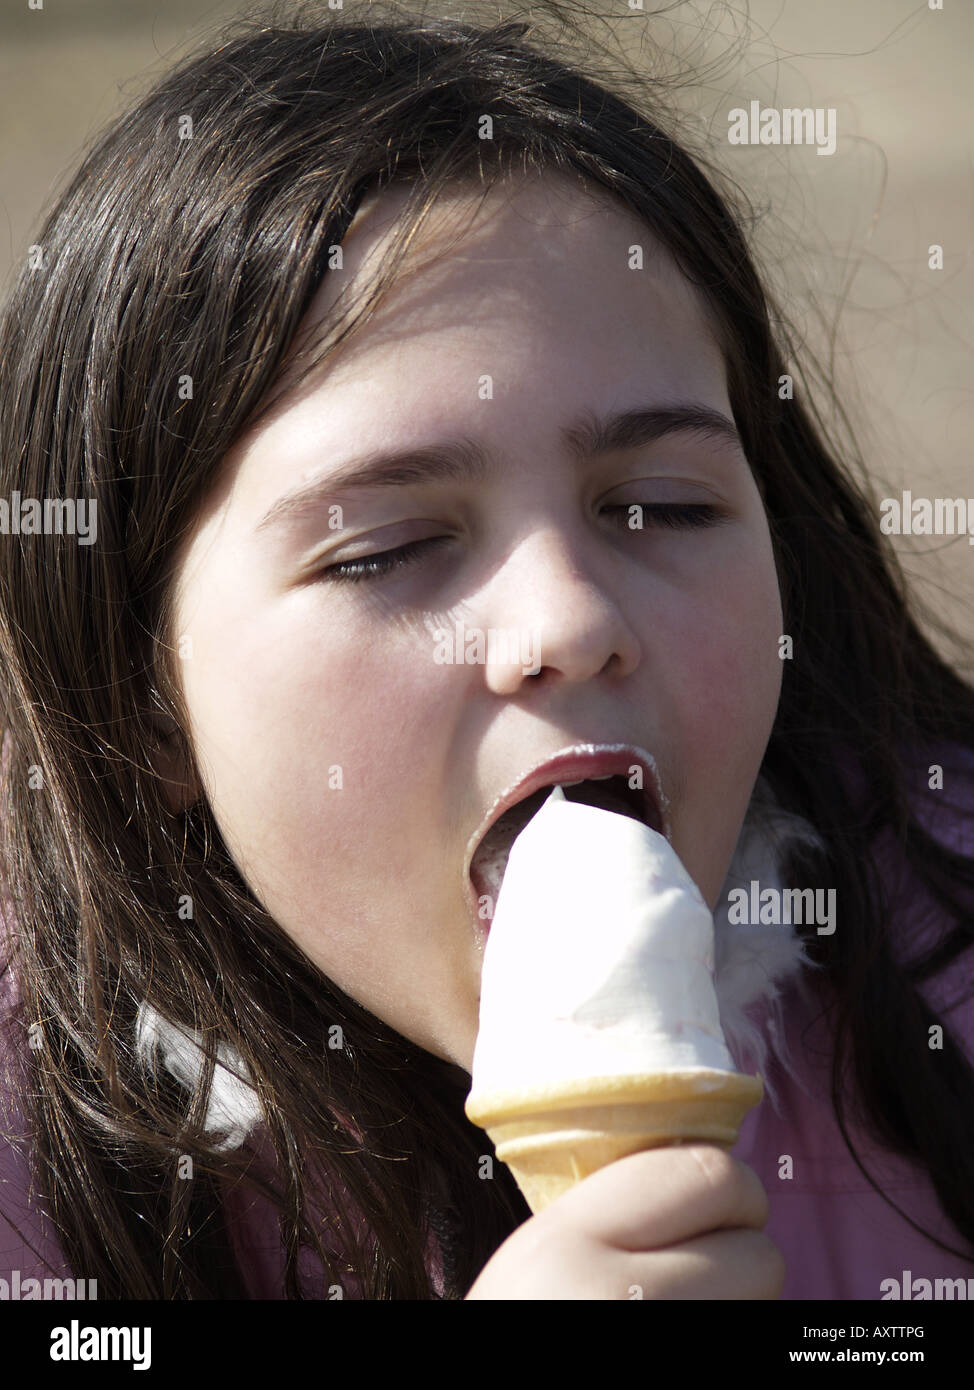 Close up of a young girl eating an ice cream Stock Photo